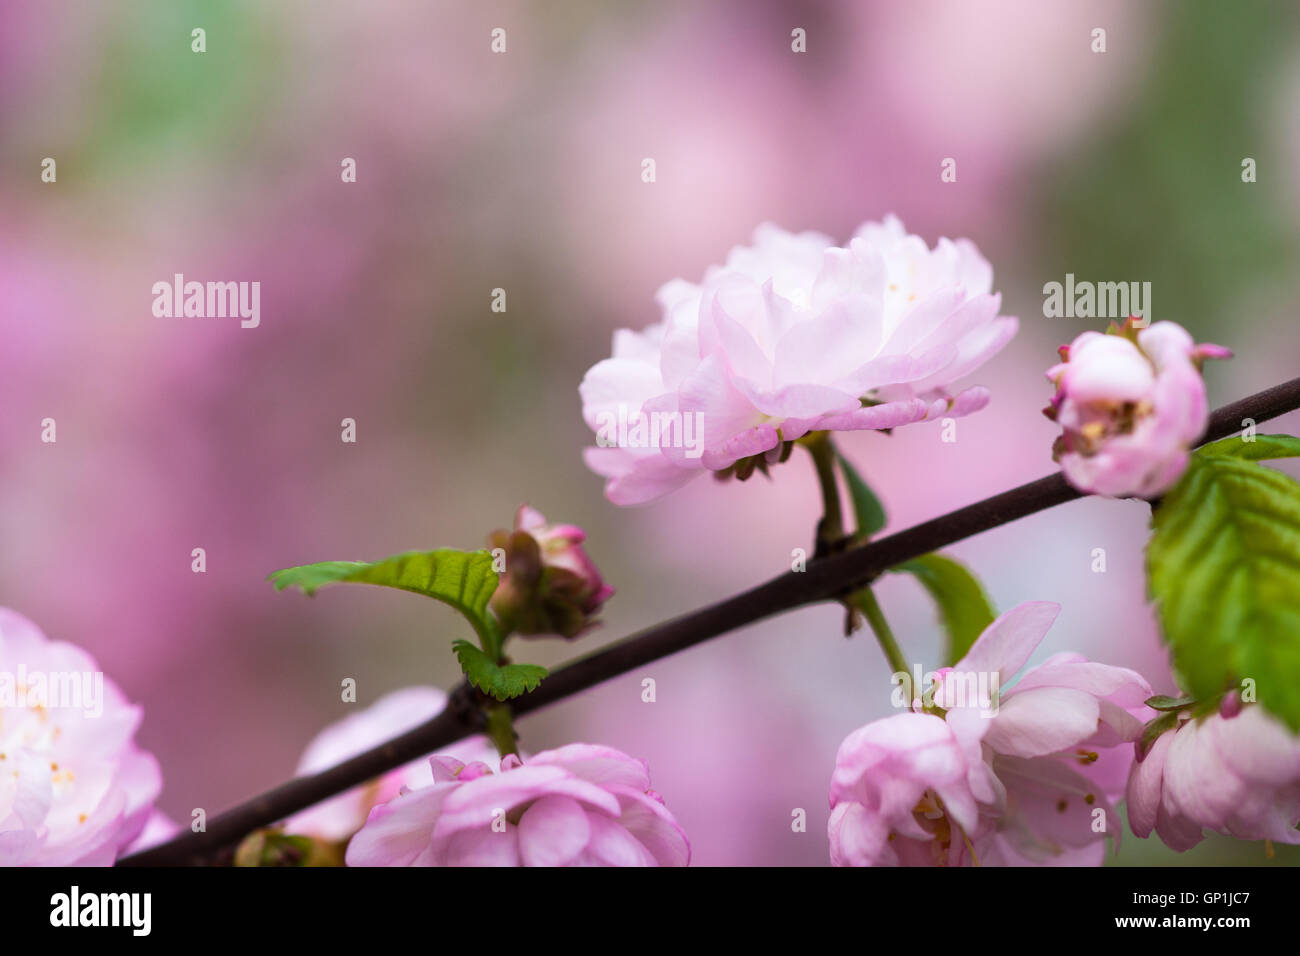 Soft pink flowers of flowering plum or prunus triloba tree against pink and green background. Spring theme. Stock Photo